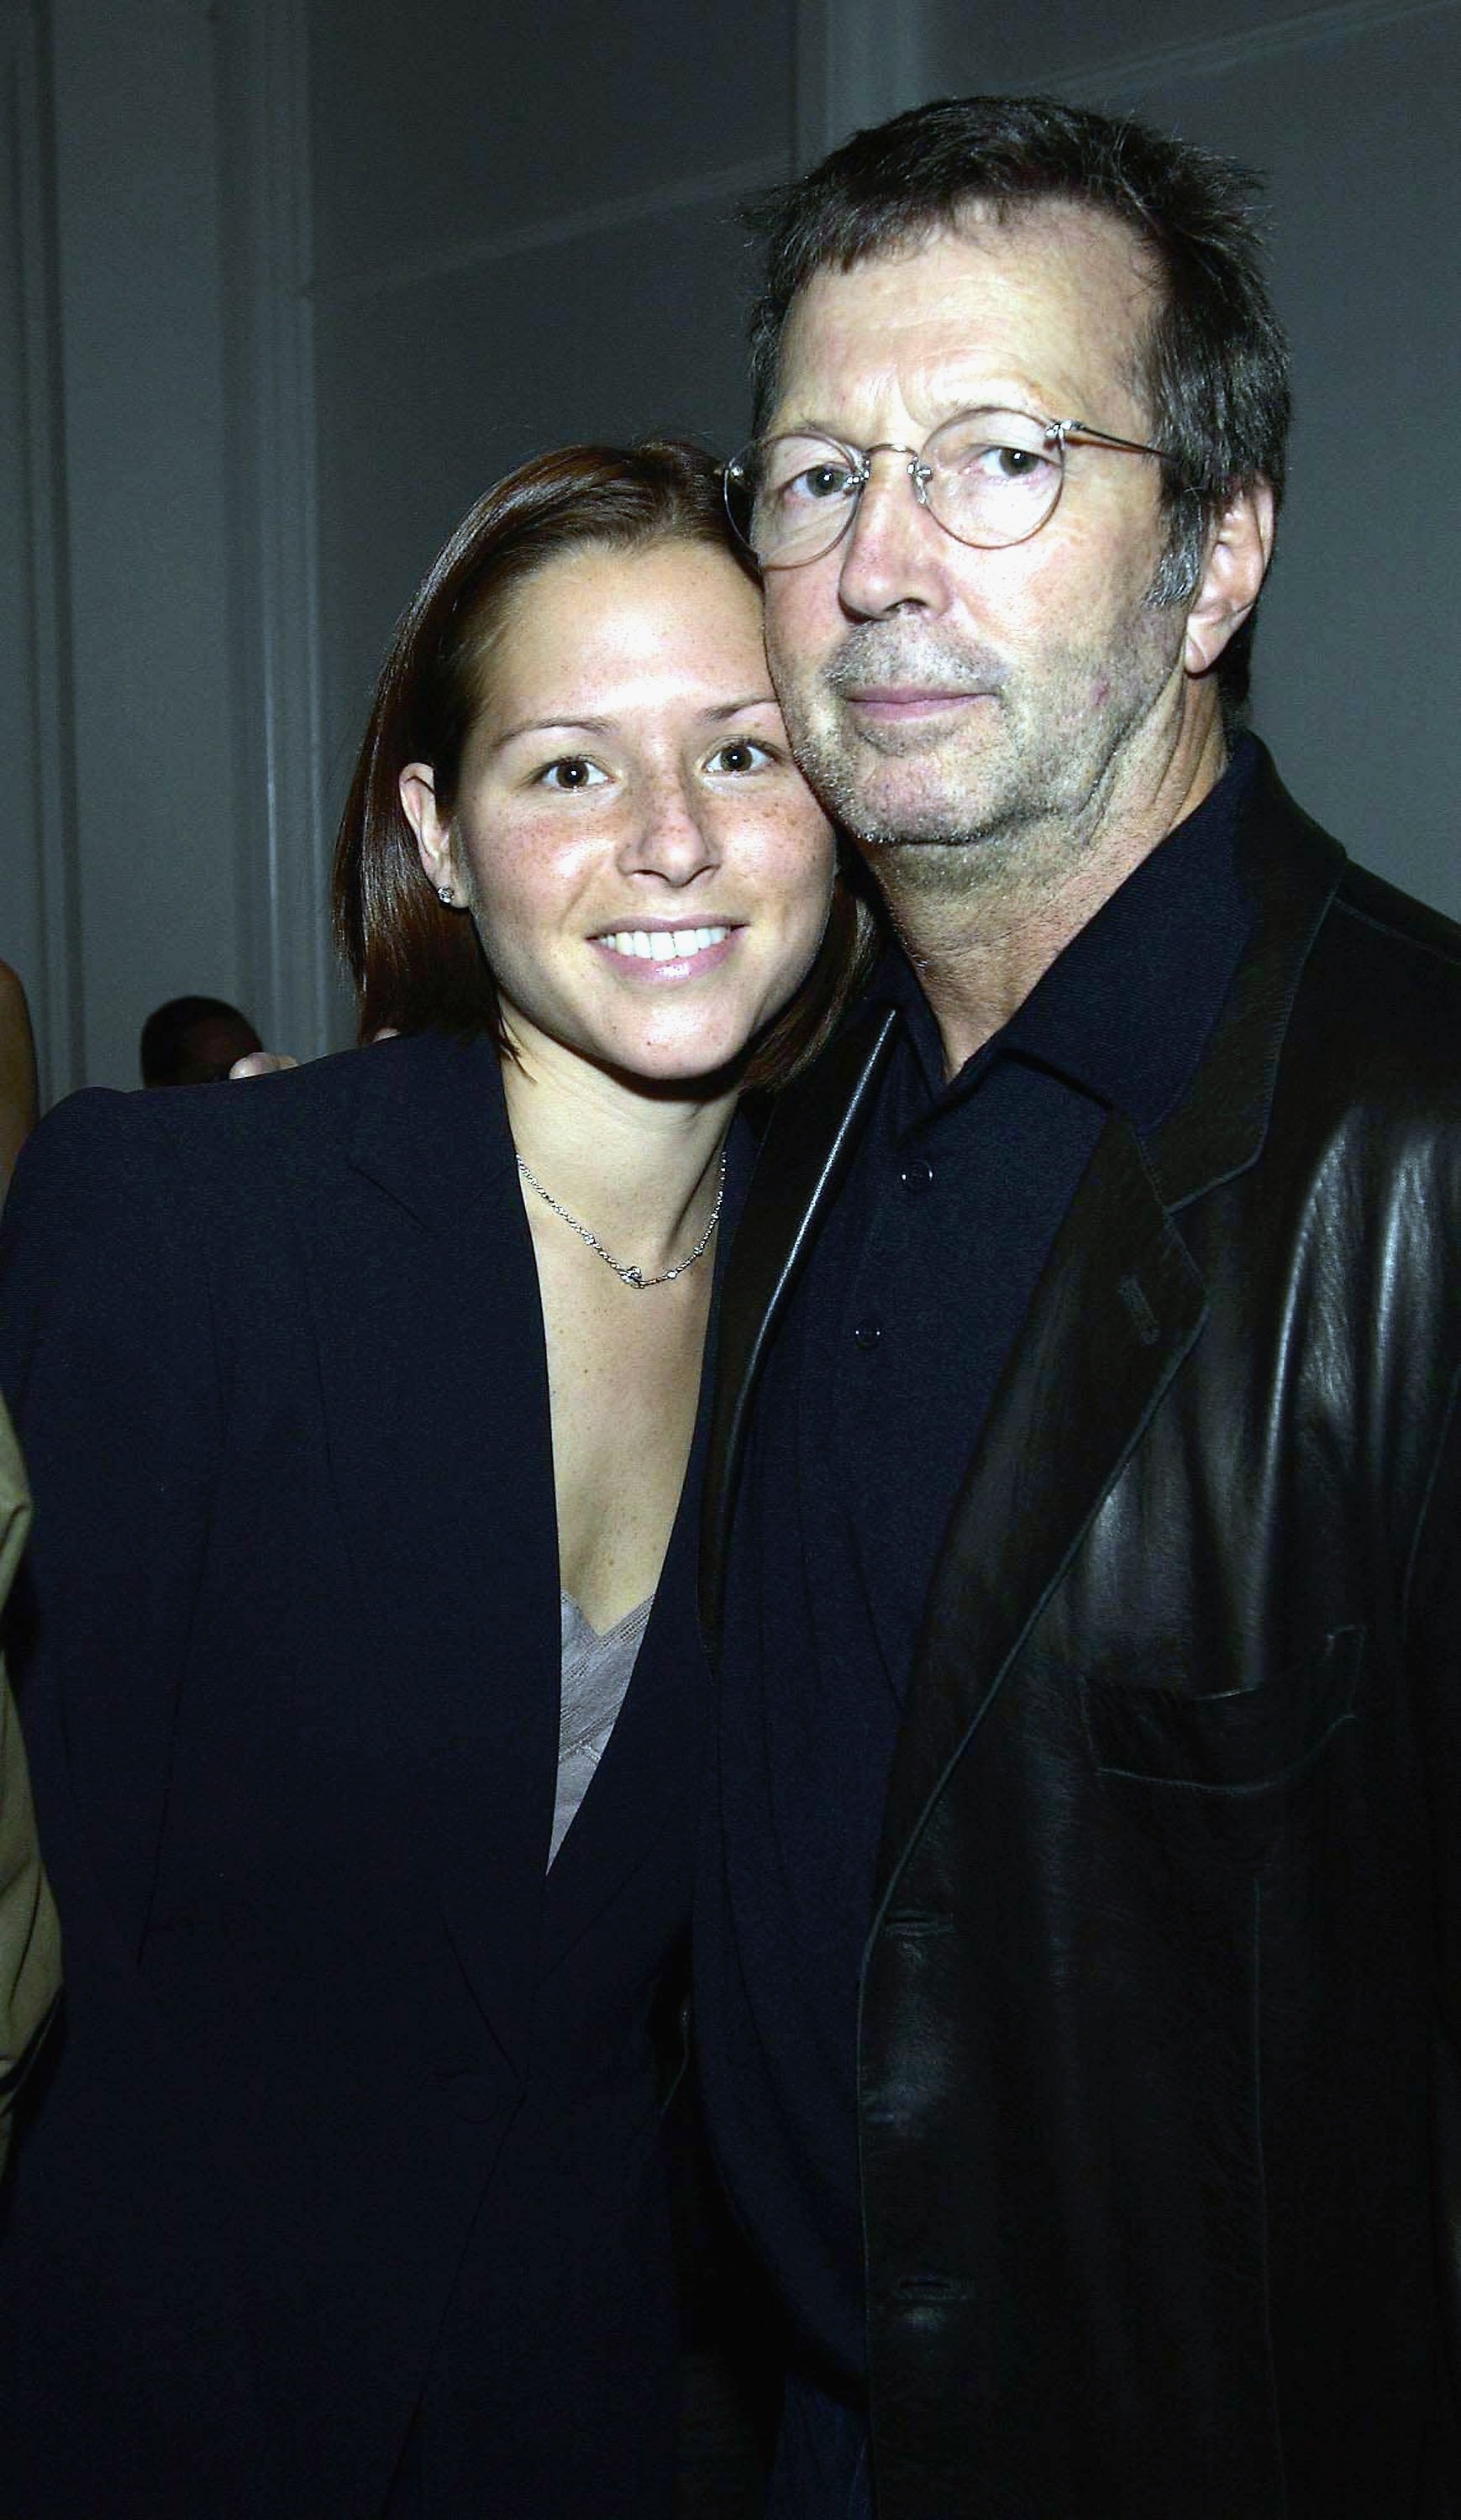 Eric Clapton and Melia McEnery at the "Giorgio Armani: A Retrospective" party on October 14, 2003, in London | Source: Getty Images